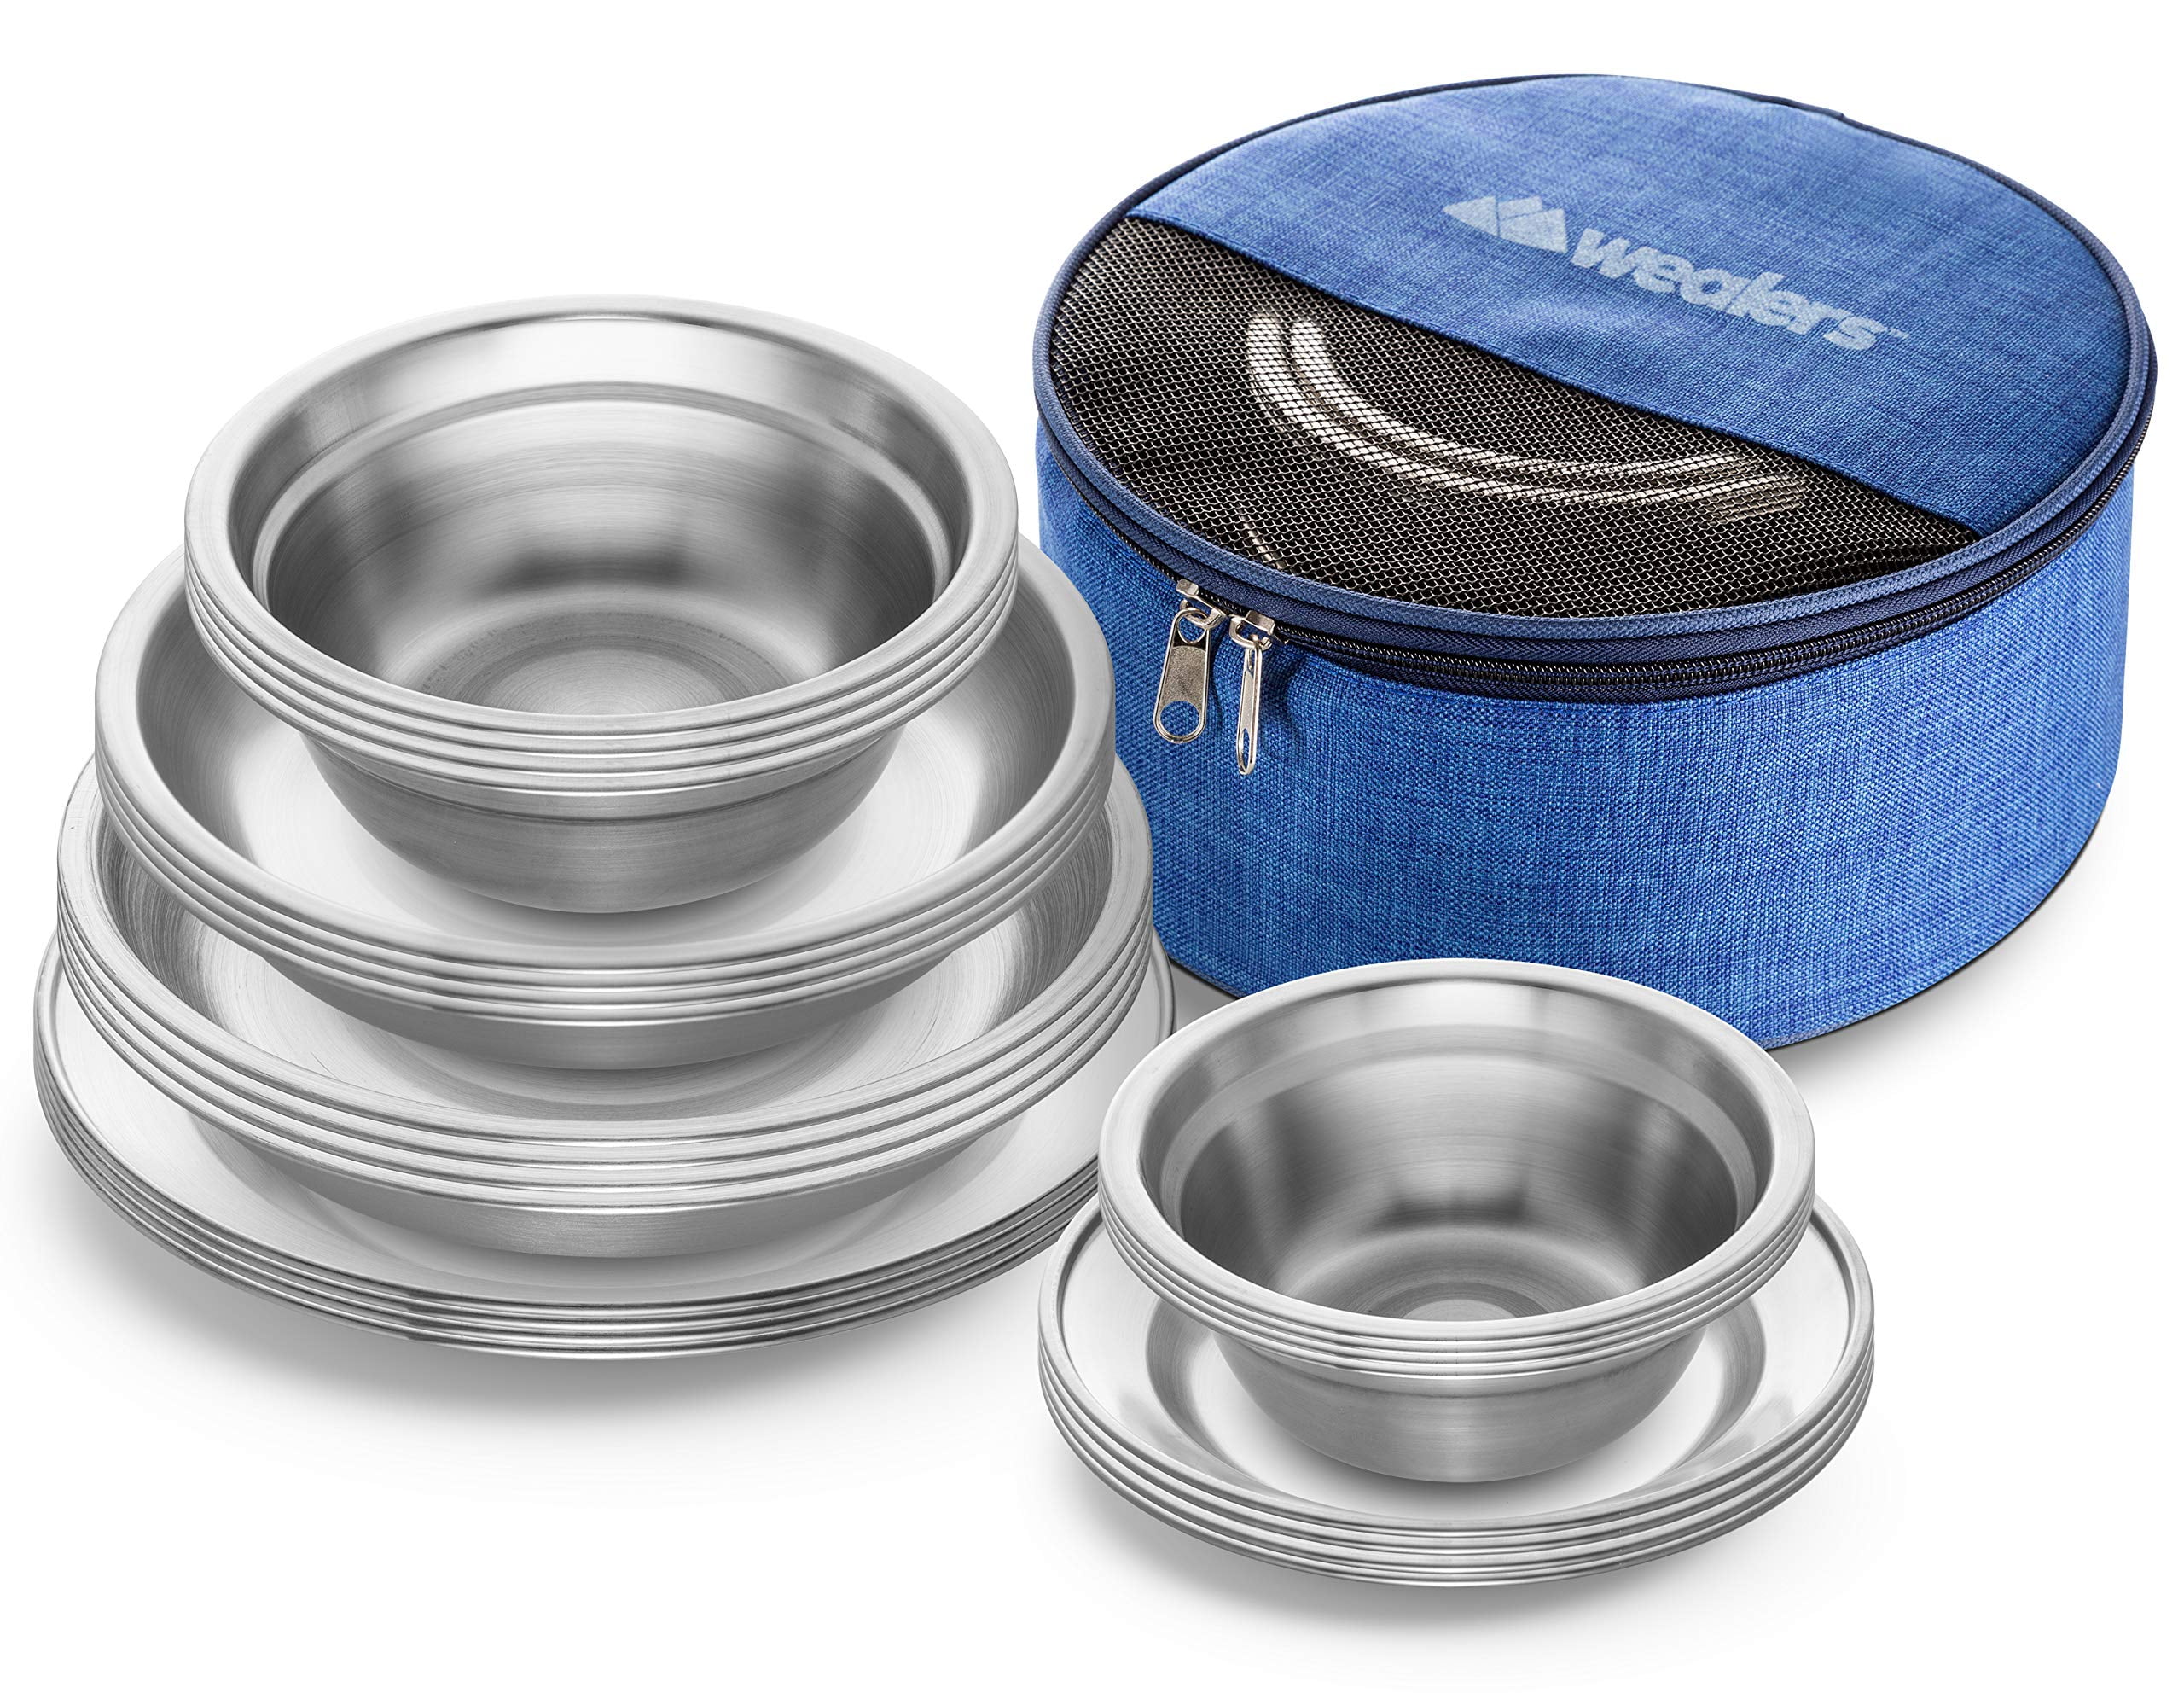 Stainless Steel Plates and Bowls Camping Set Family Dinnerware 24-Pcs Stainless Steel Camping Dish Set